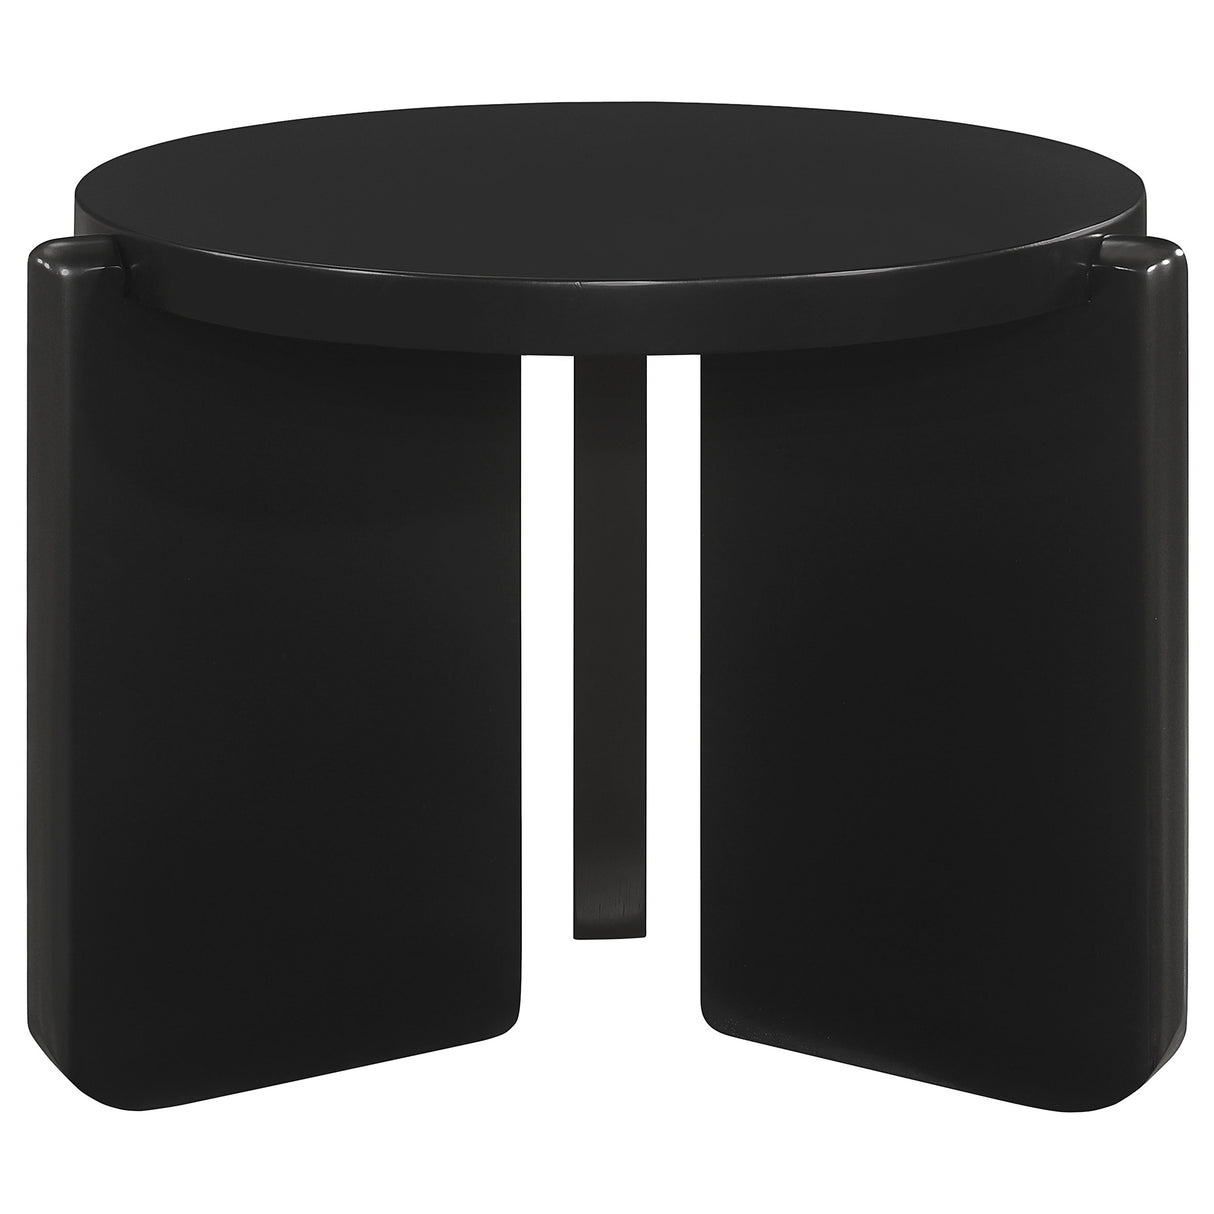 End Table - Cordova Round Solid Wood End Table Black